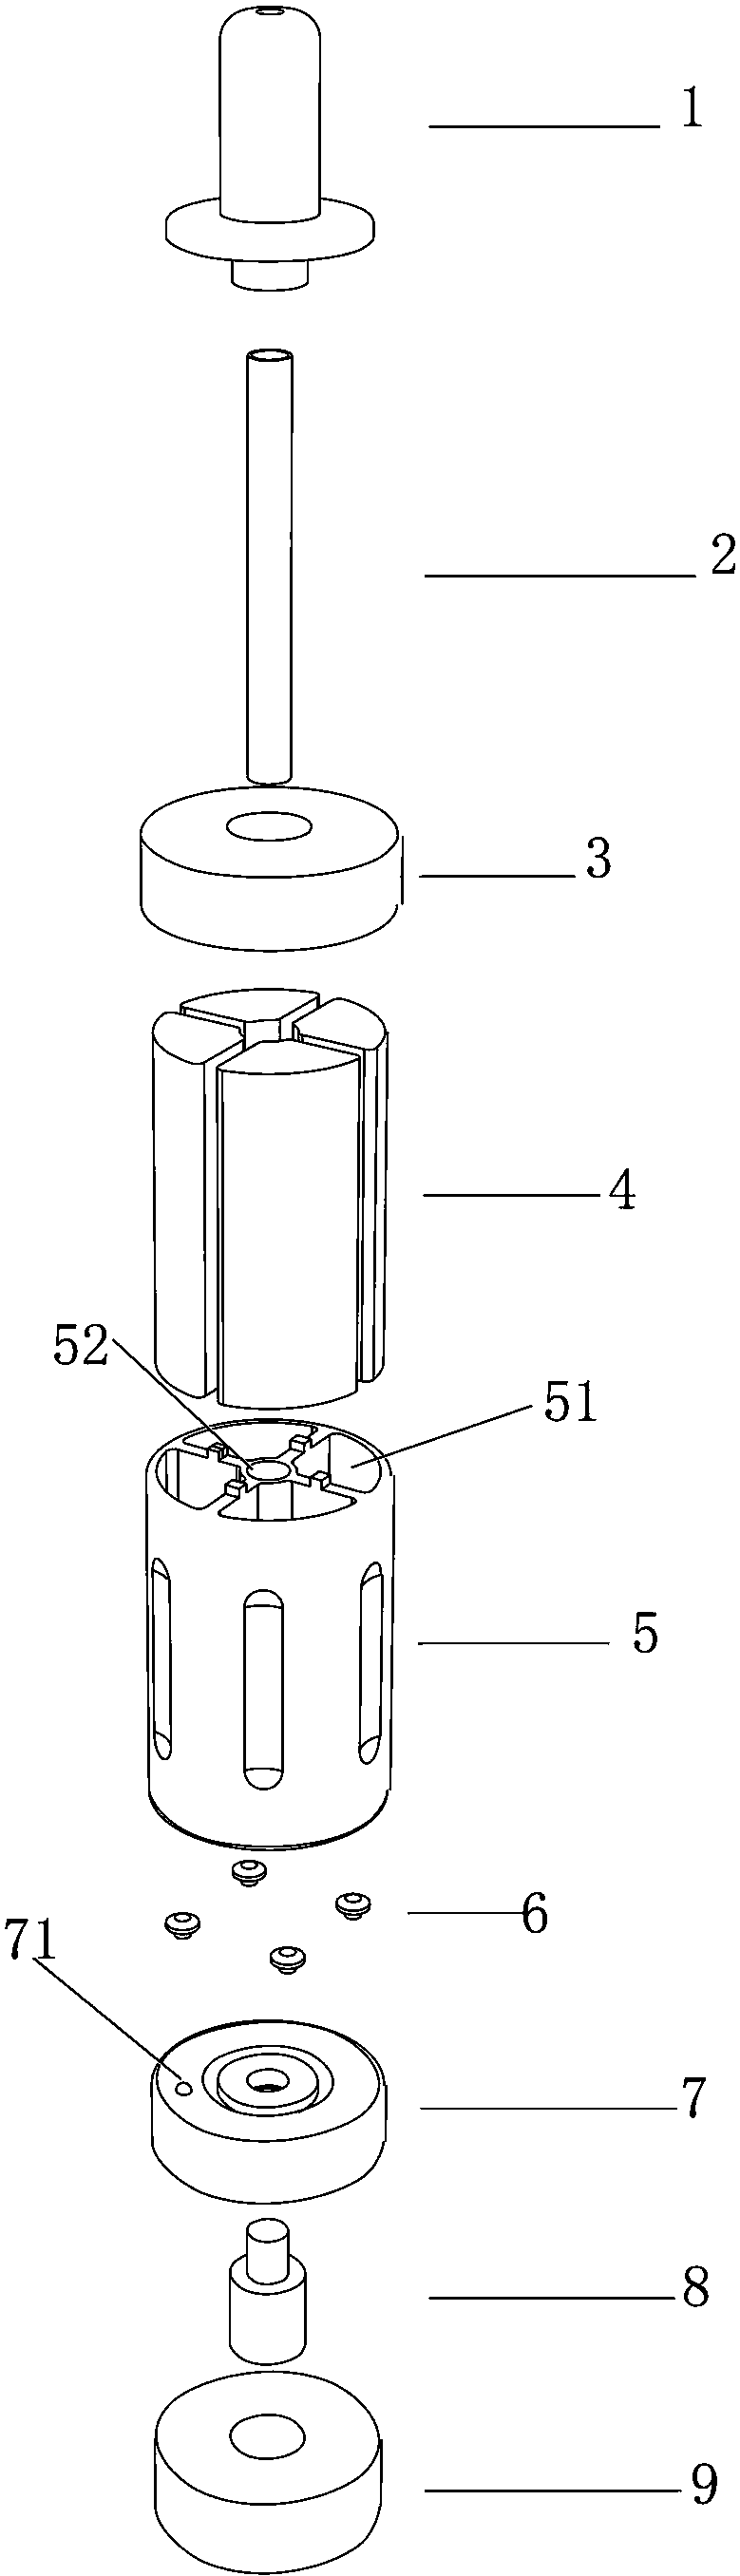 Atomizer with multiple tobacco extract bottles